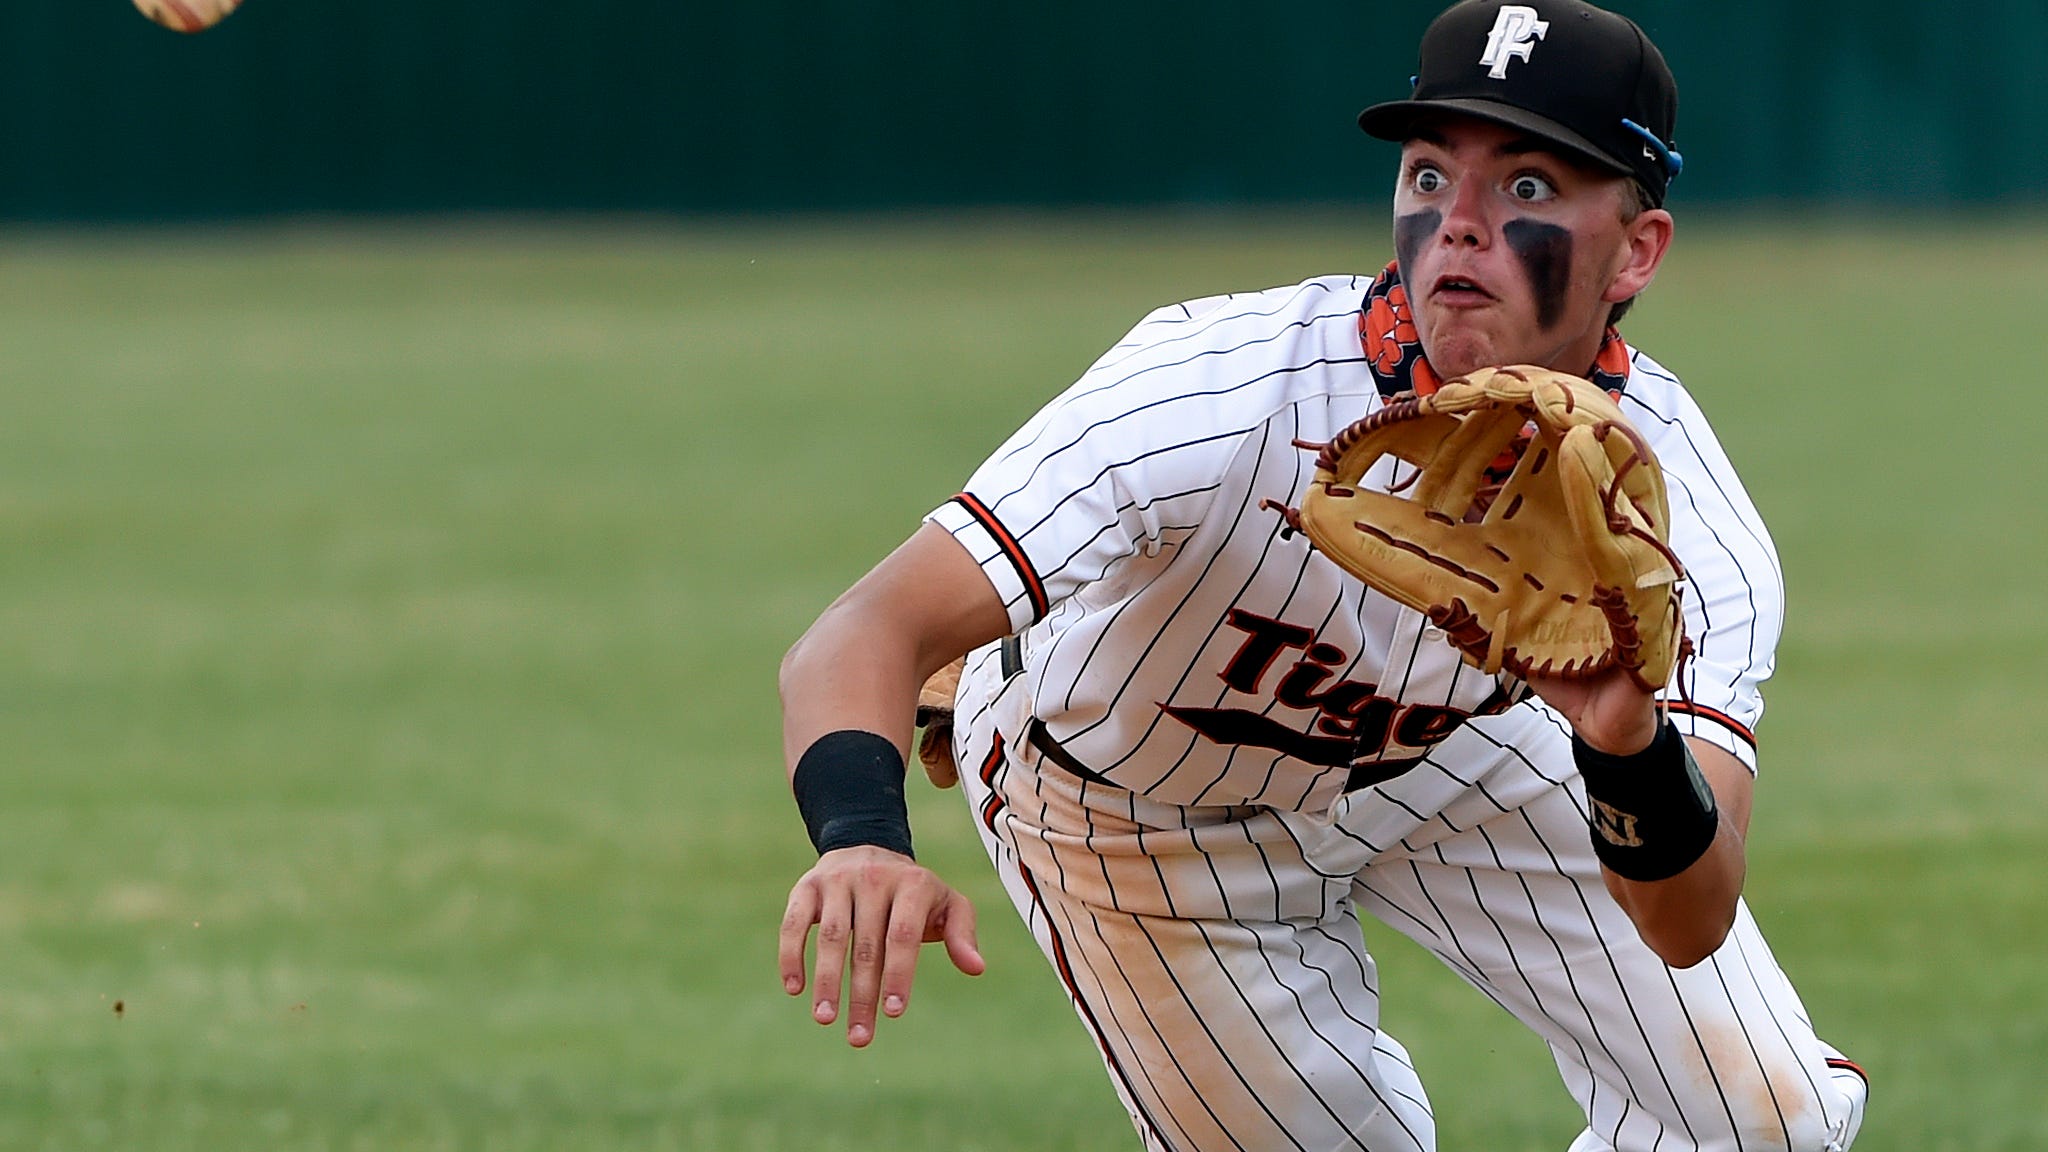 TSSAA baseball: What to know after Day 2 of Spring Fling